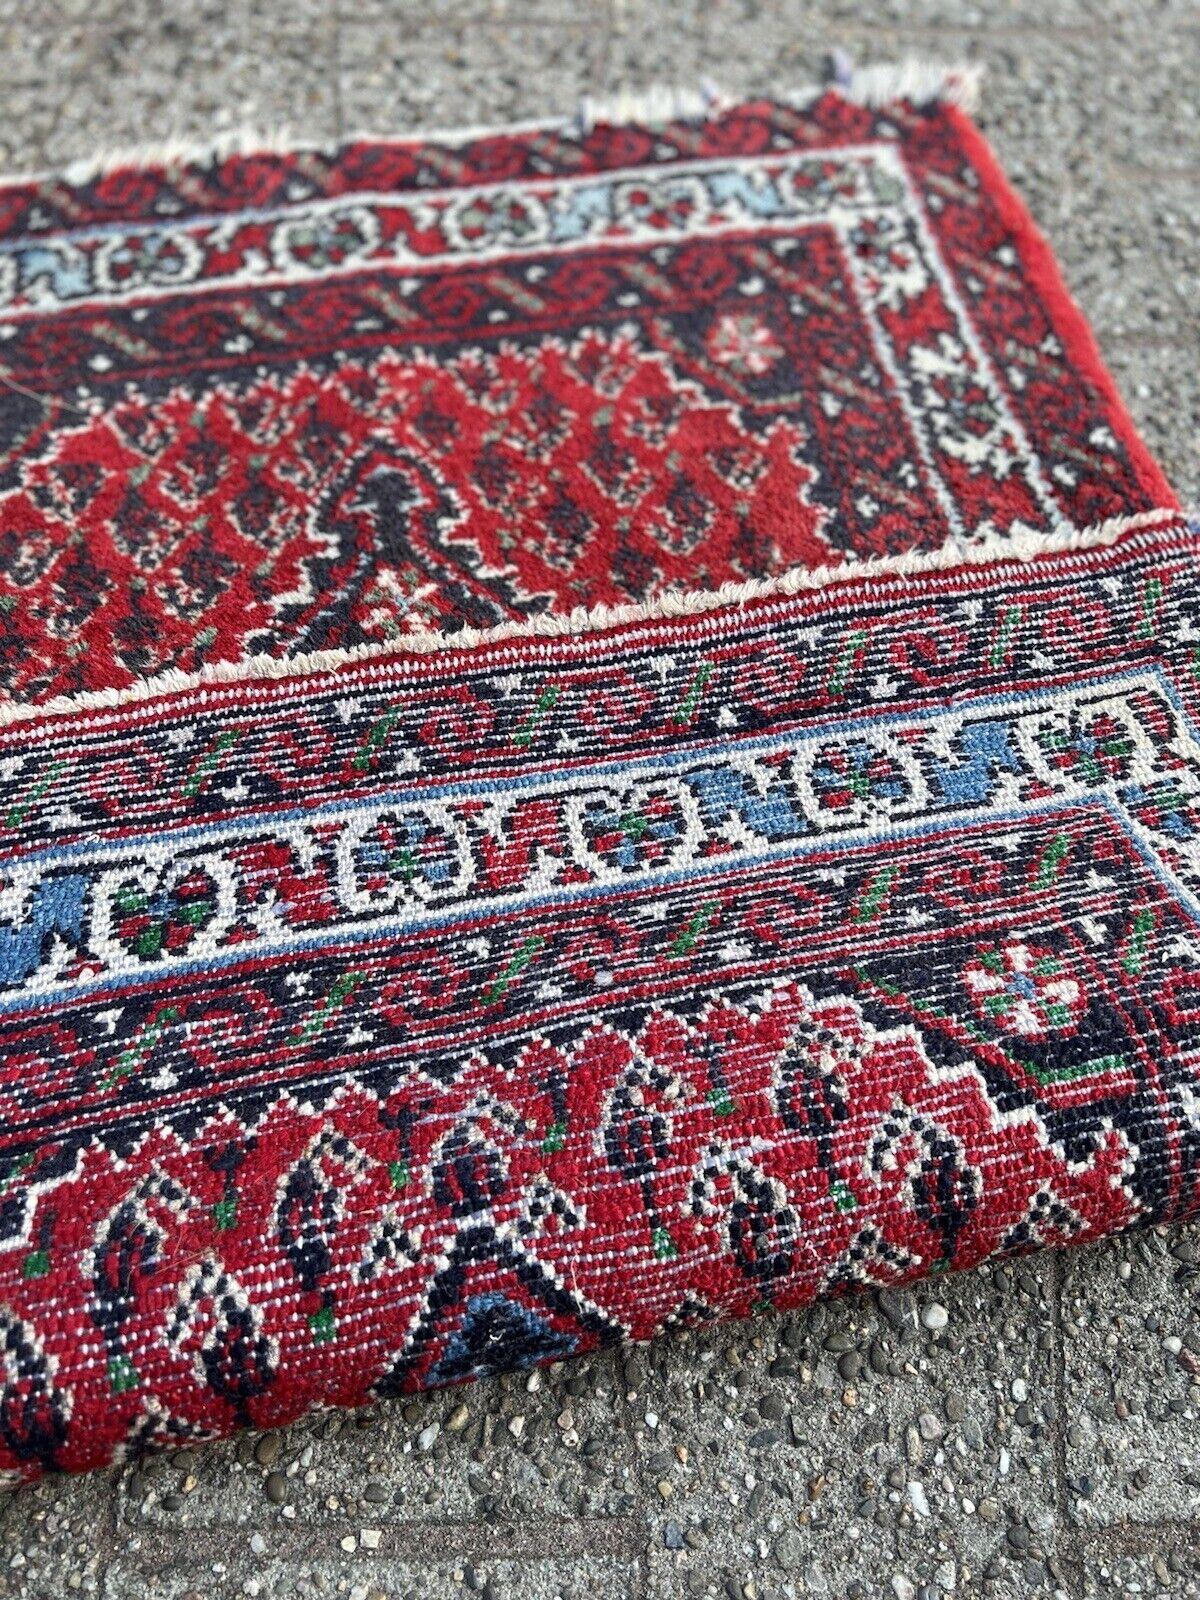 Handmade Vintage Persian Style Hamadan Rug 2.1' x 2.9', 1970s - 1S35 In Good Condition For Sale In Bordeaux, FR